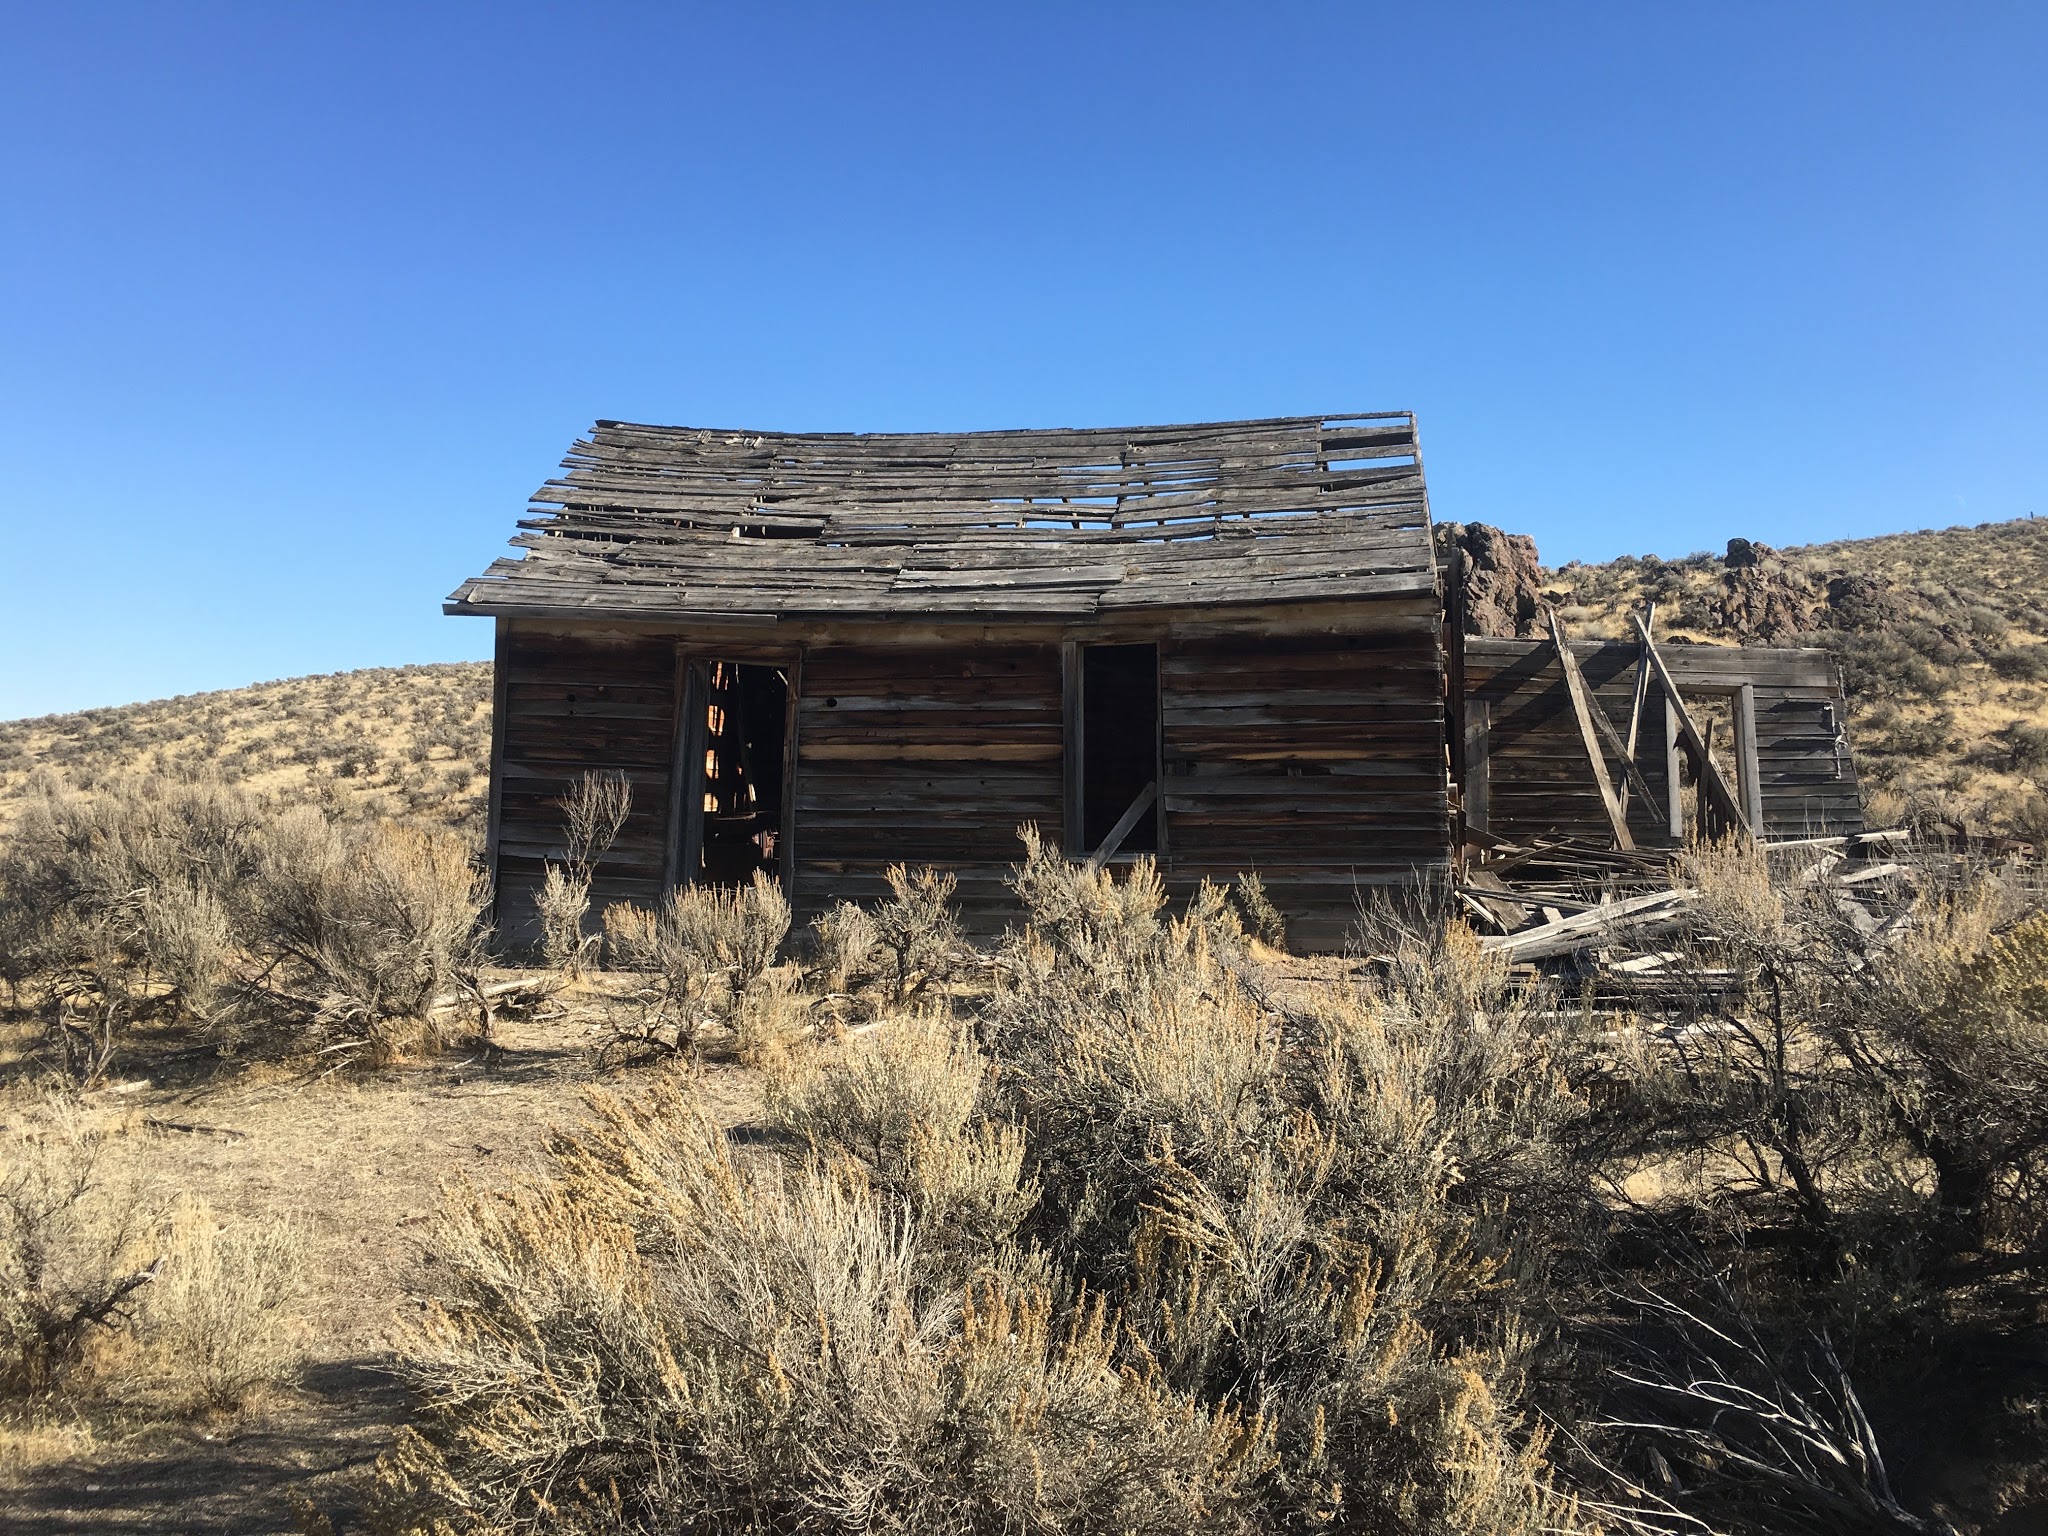 Rural Ruin: Old Cabins and Ruins of Civilization